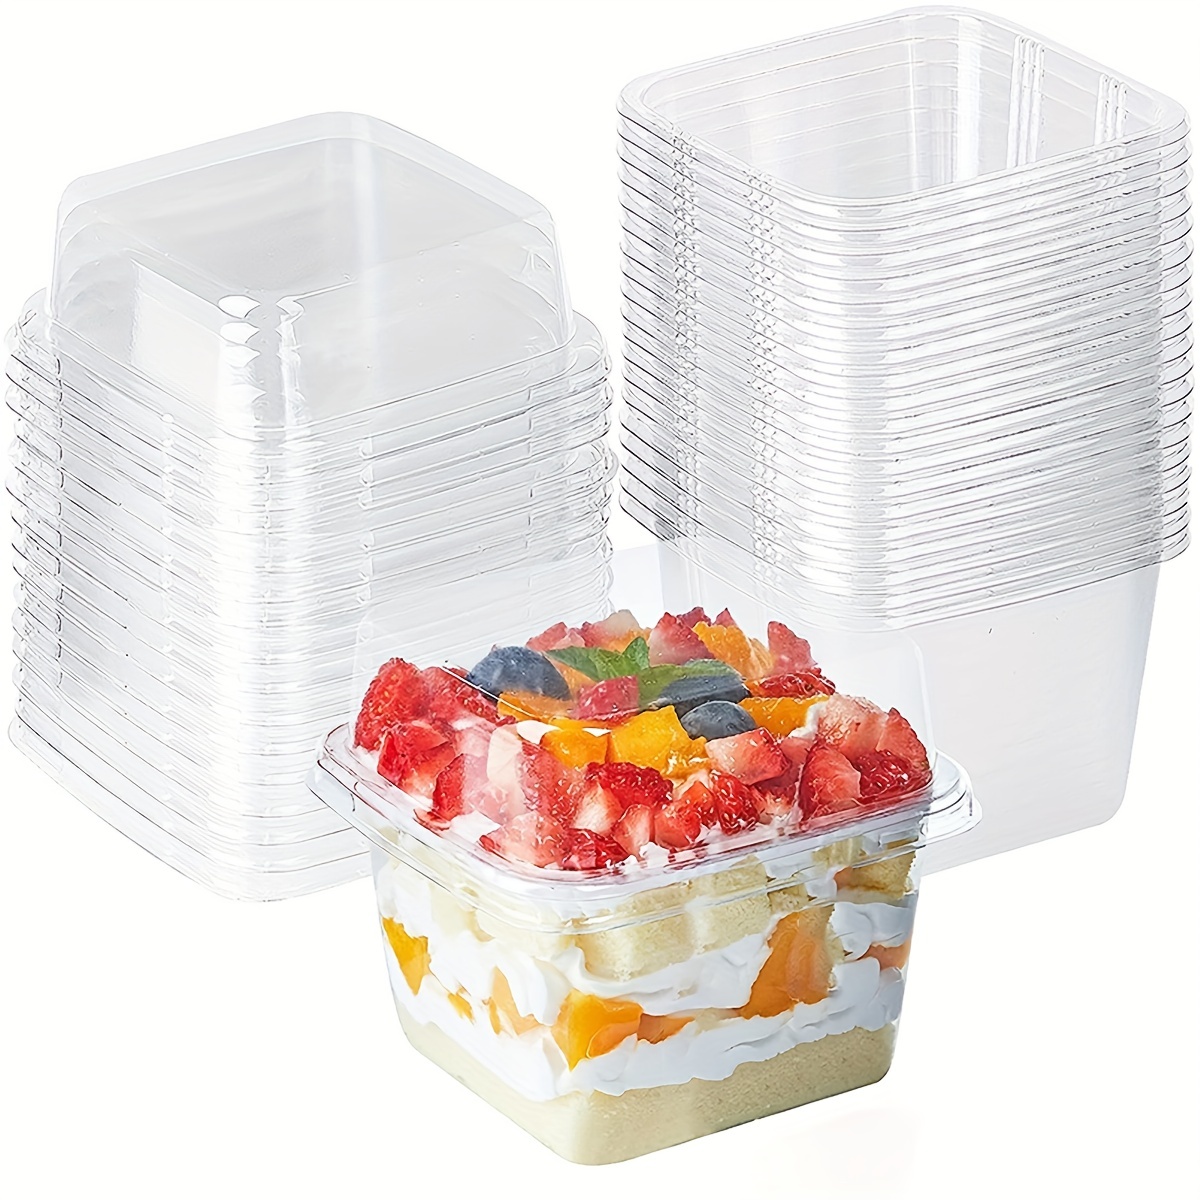 

20pcs Clear Plastic Square Dessert Cups With Lids - Perfect For Mousse, Pudding, Oats, Fruit, And More - Single Compartment Cupcake Carrier Holder Box - Perfect For Parties, Appetizers, And Baking!